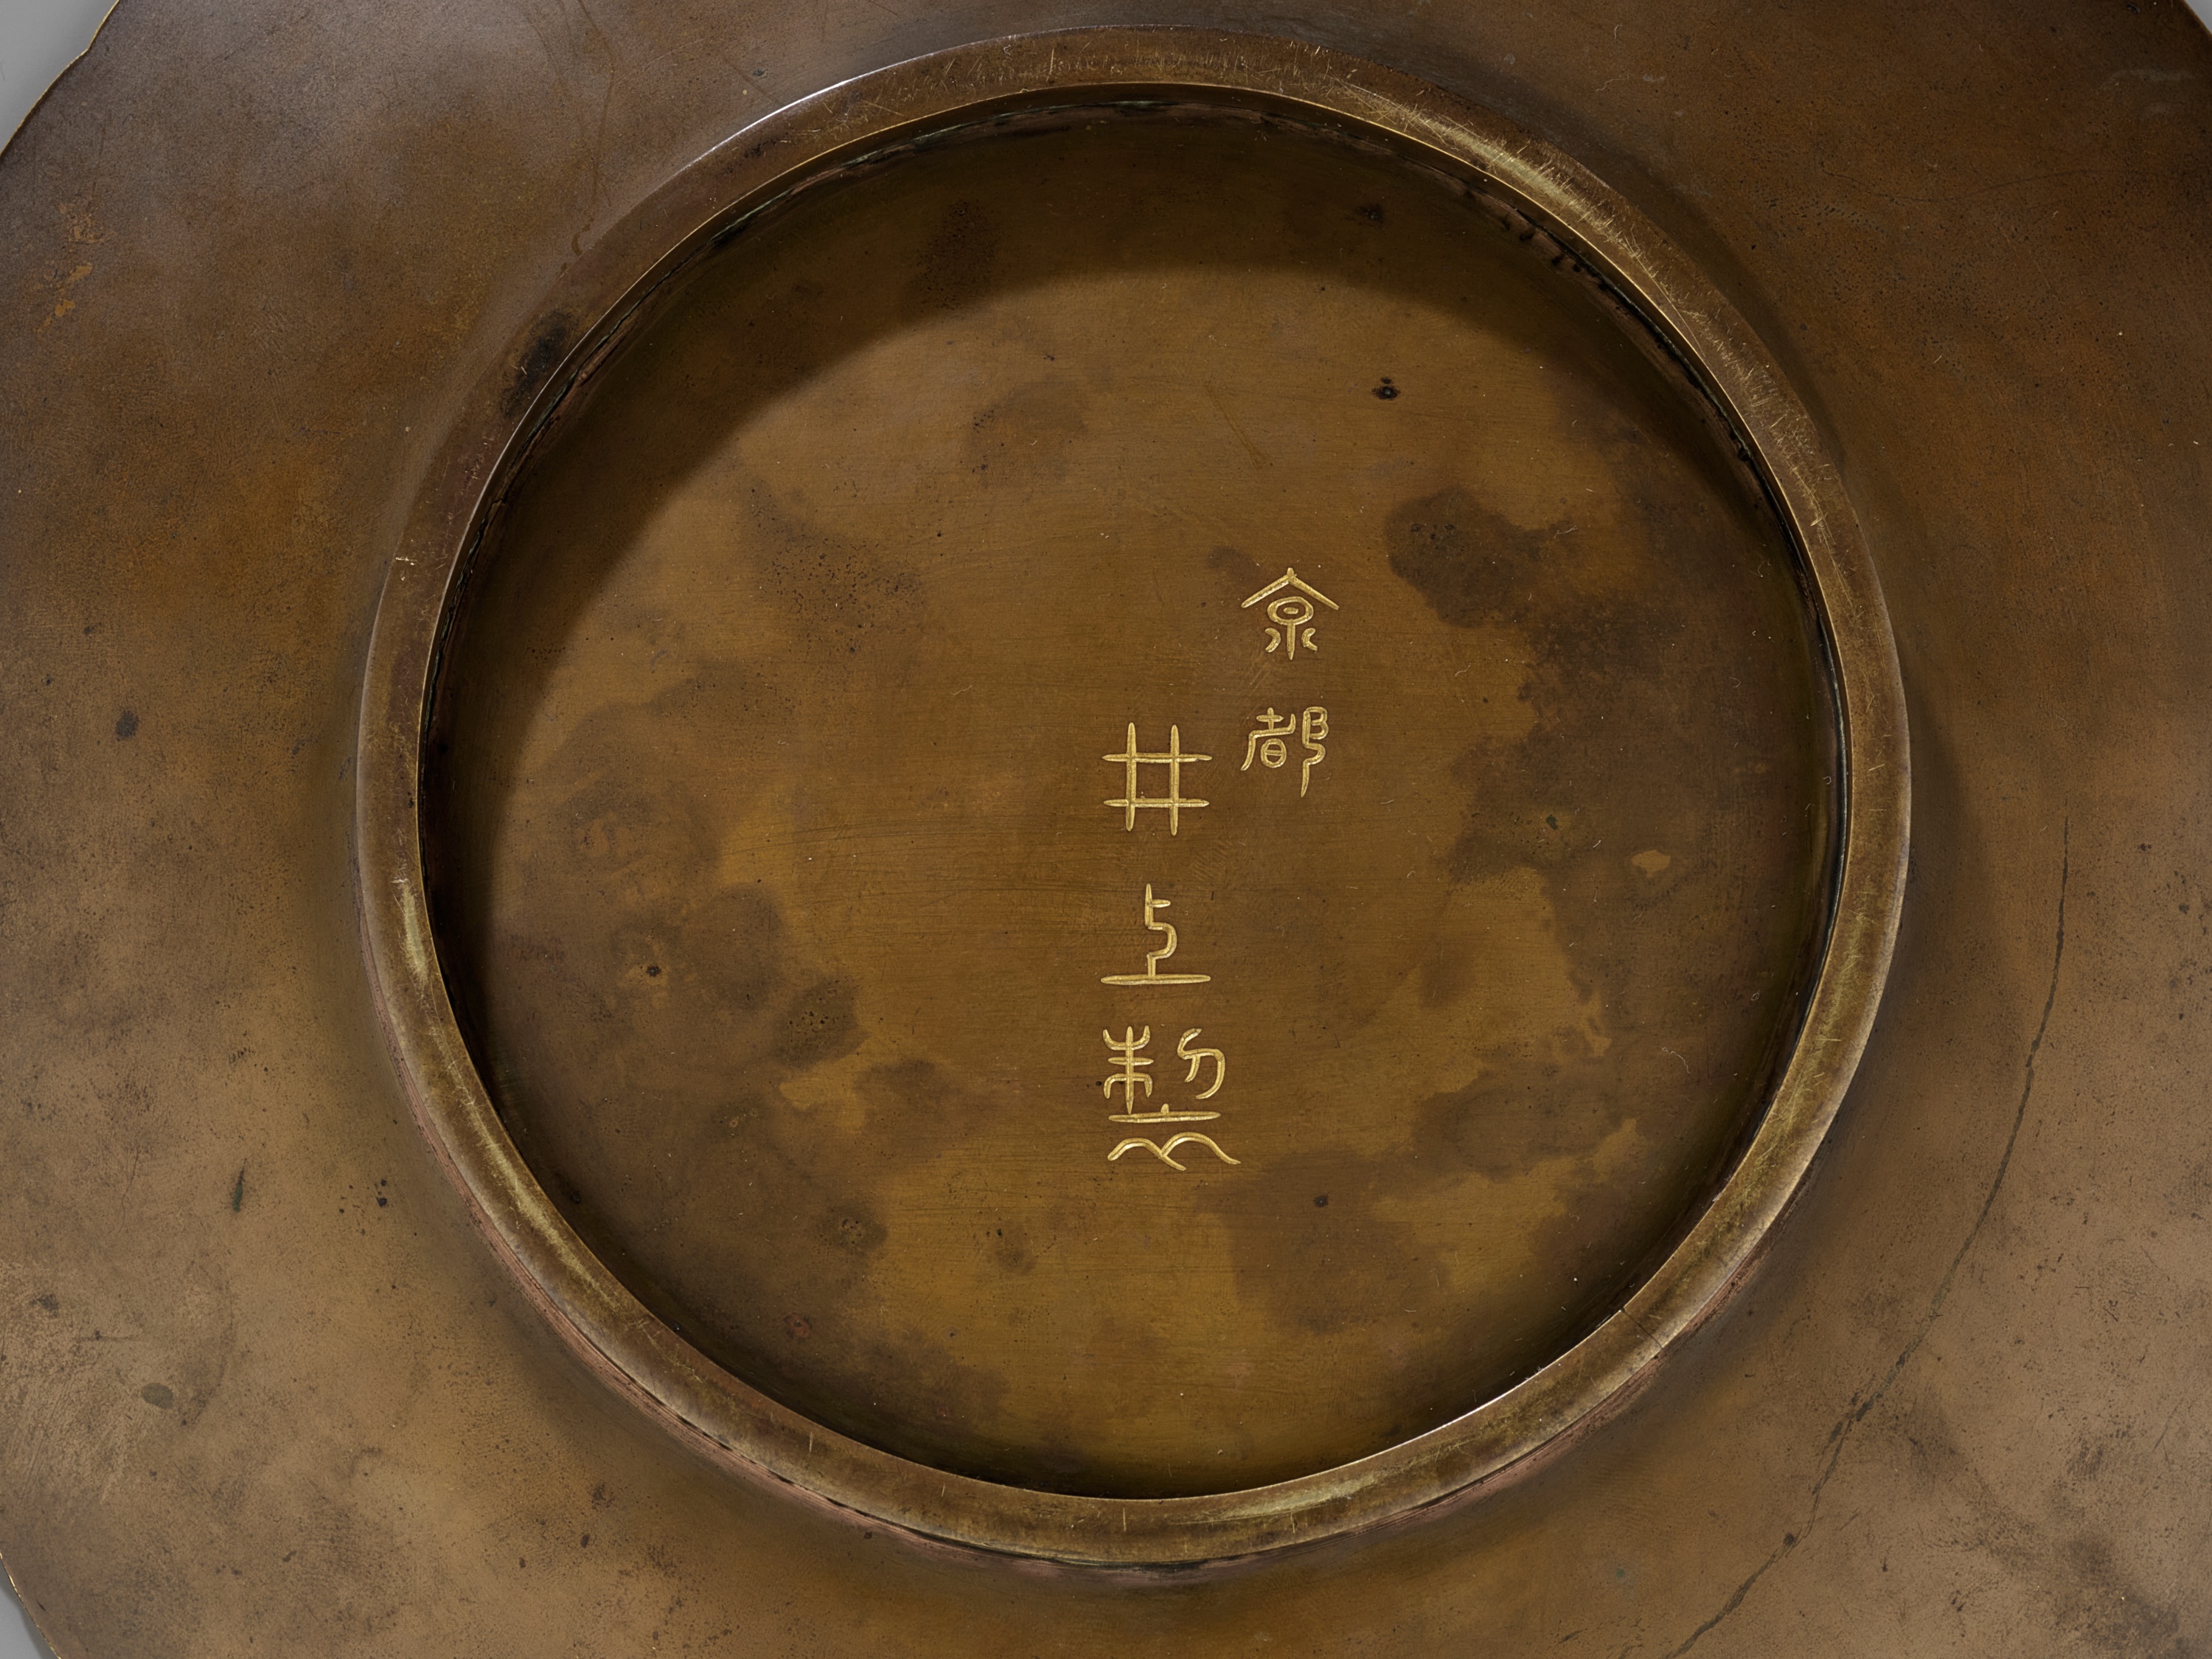 INOUE: A SUPERB INLAID BRONZE DISH DEPICTING BOYS ON A DRAGON BOAT - Image 5 of 6